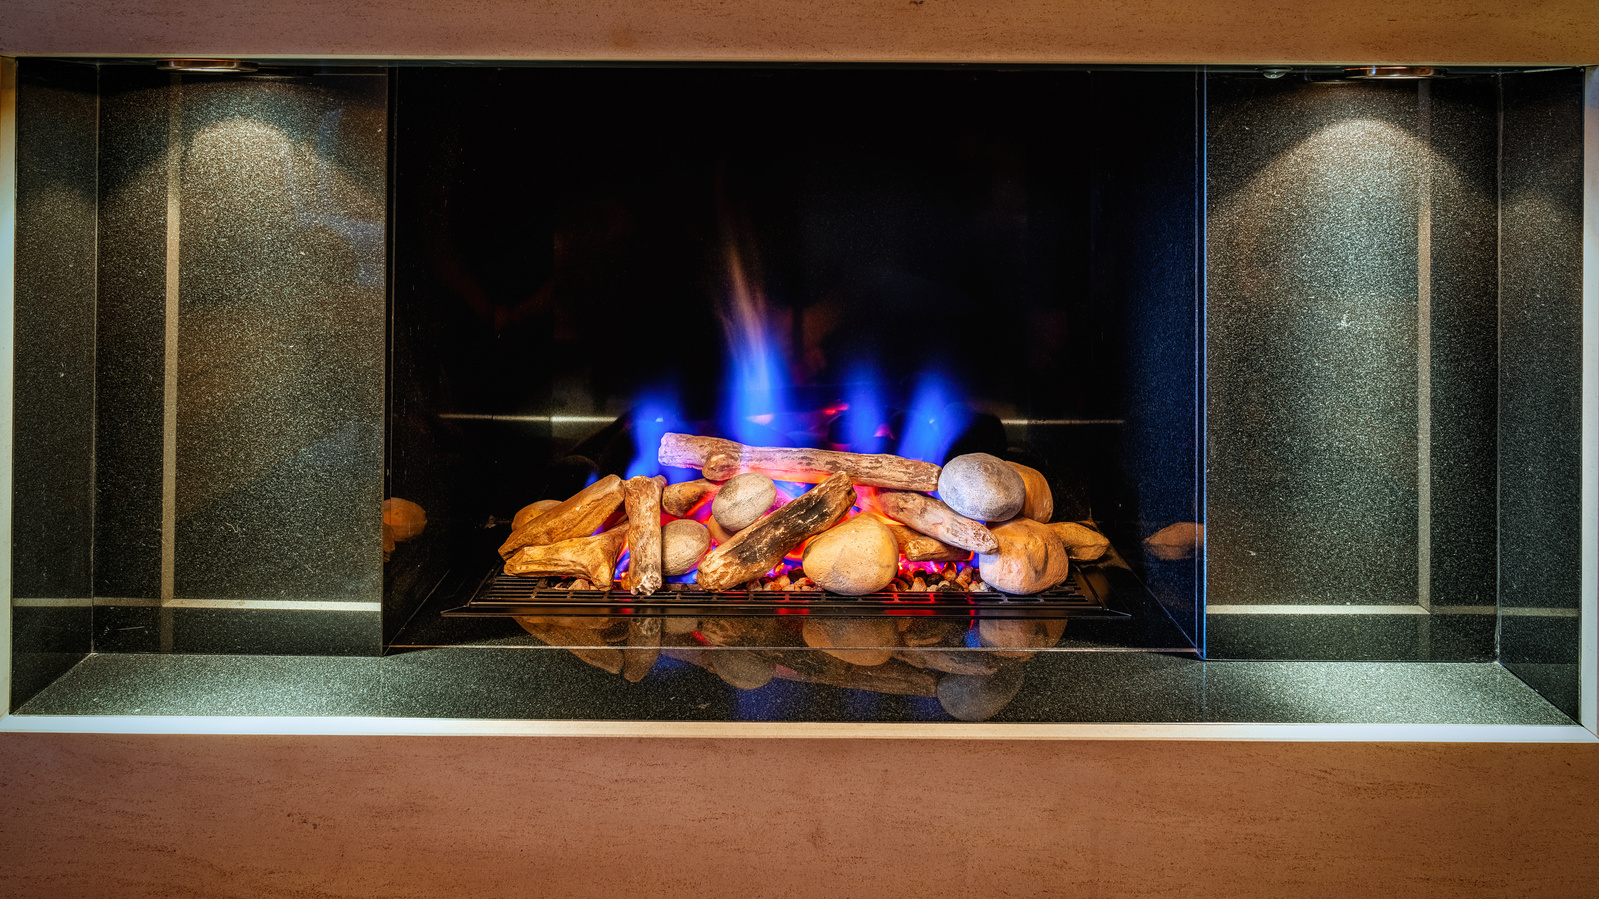 Fireplace for Scotland Interior Property - Photography by Nate Cleary